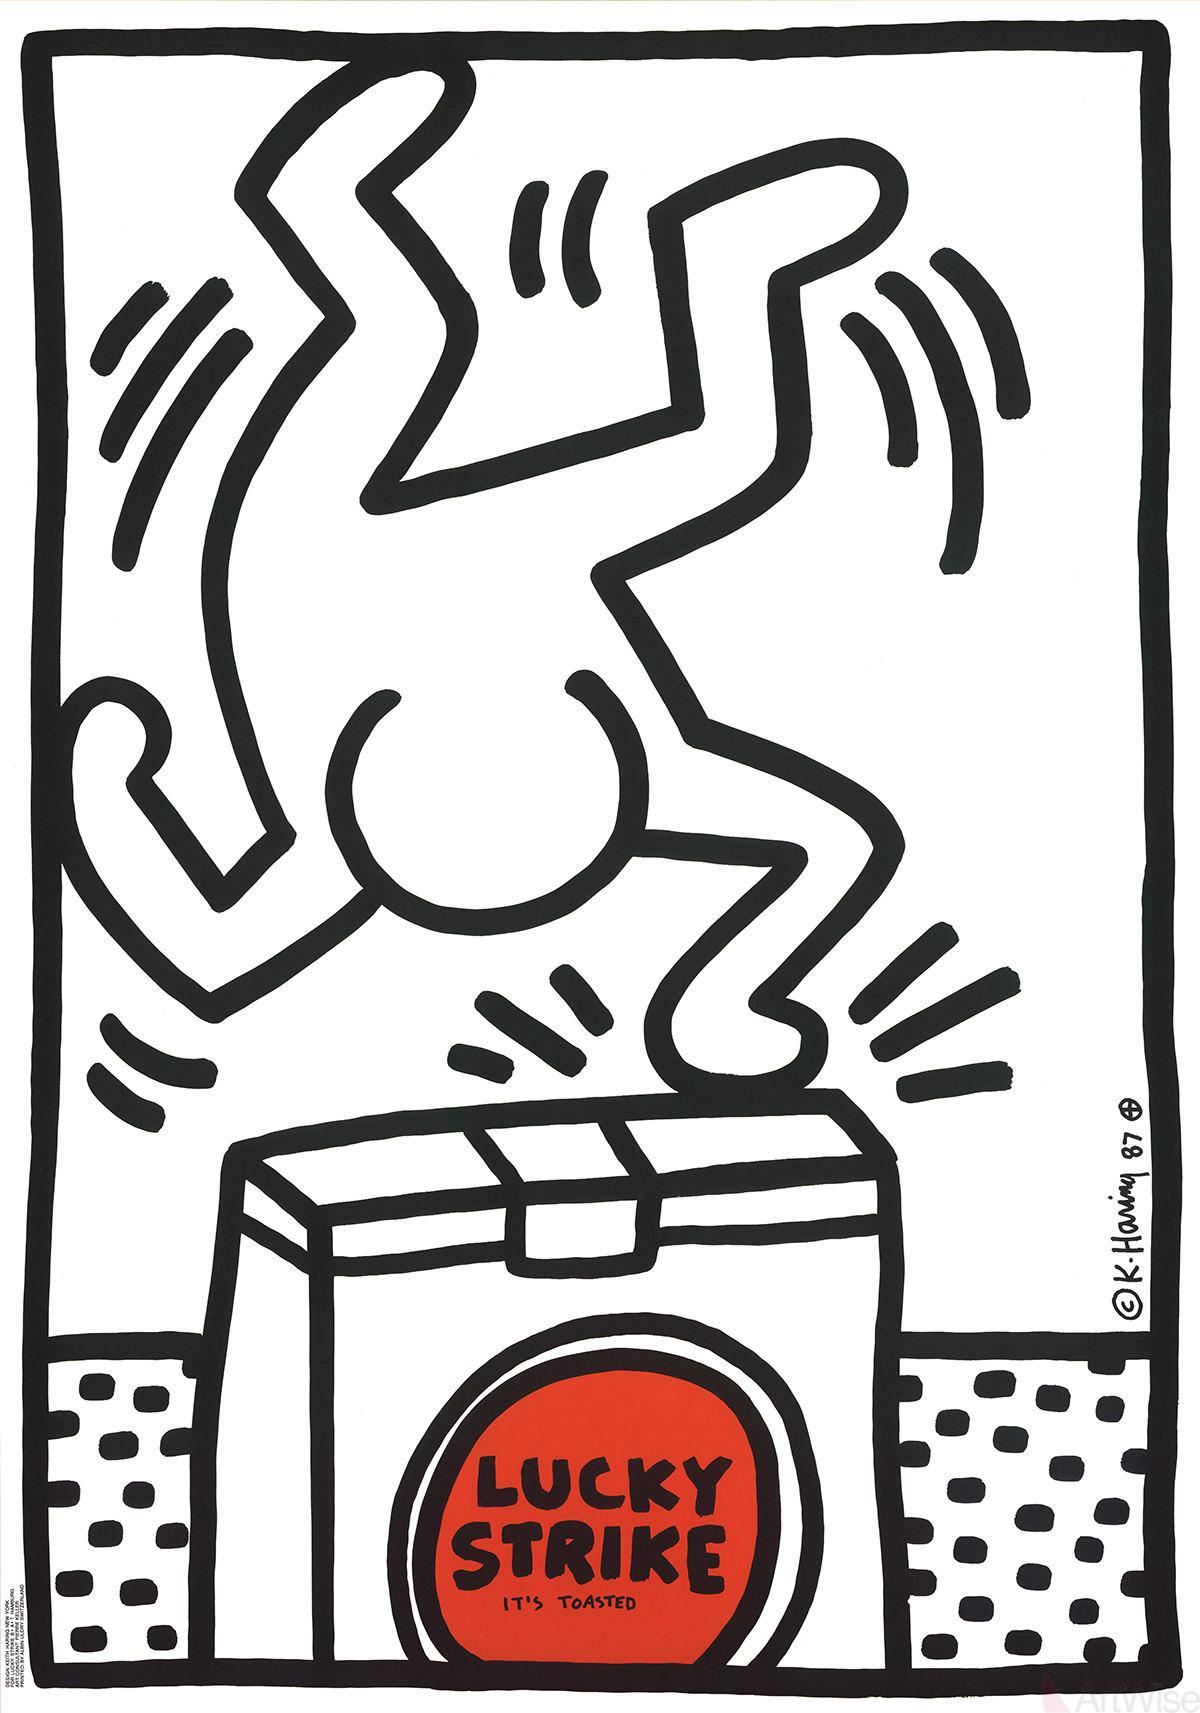 Vintage original Keith Haring Lucky Strike Screen-print, 1987

"The advertising posters for Lucky Strike cigarettes reflect the popular Montreux posters from 1983. According to the imprint, they were commissioned by Lucky Strike Switzerland,